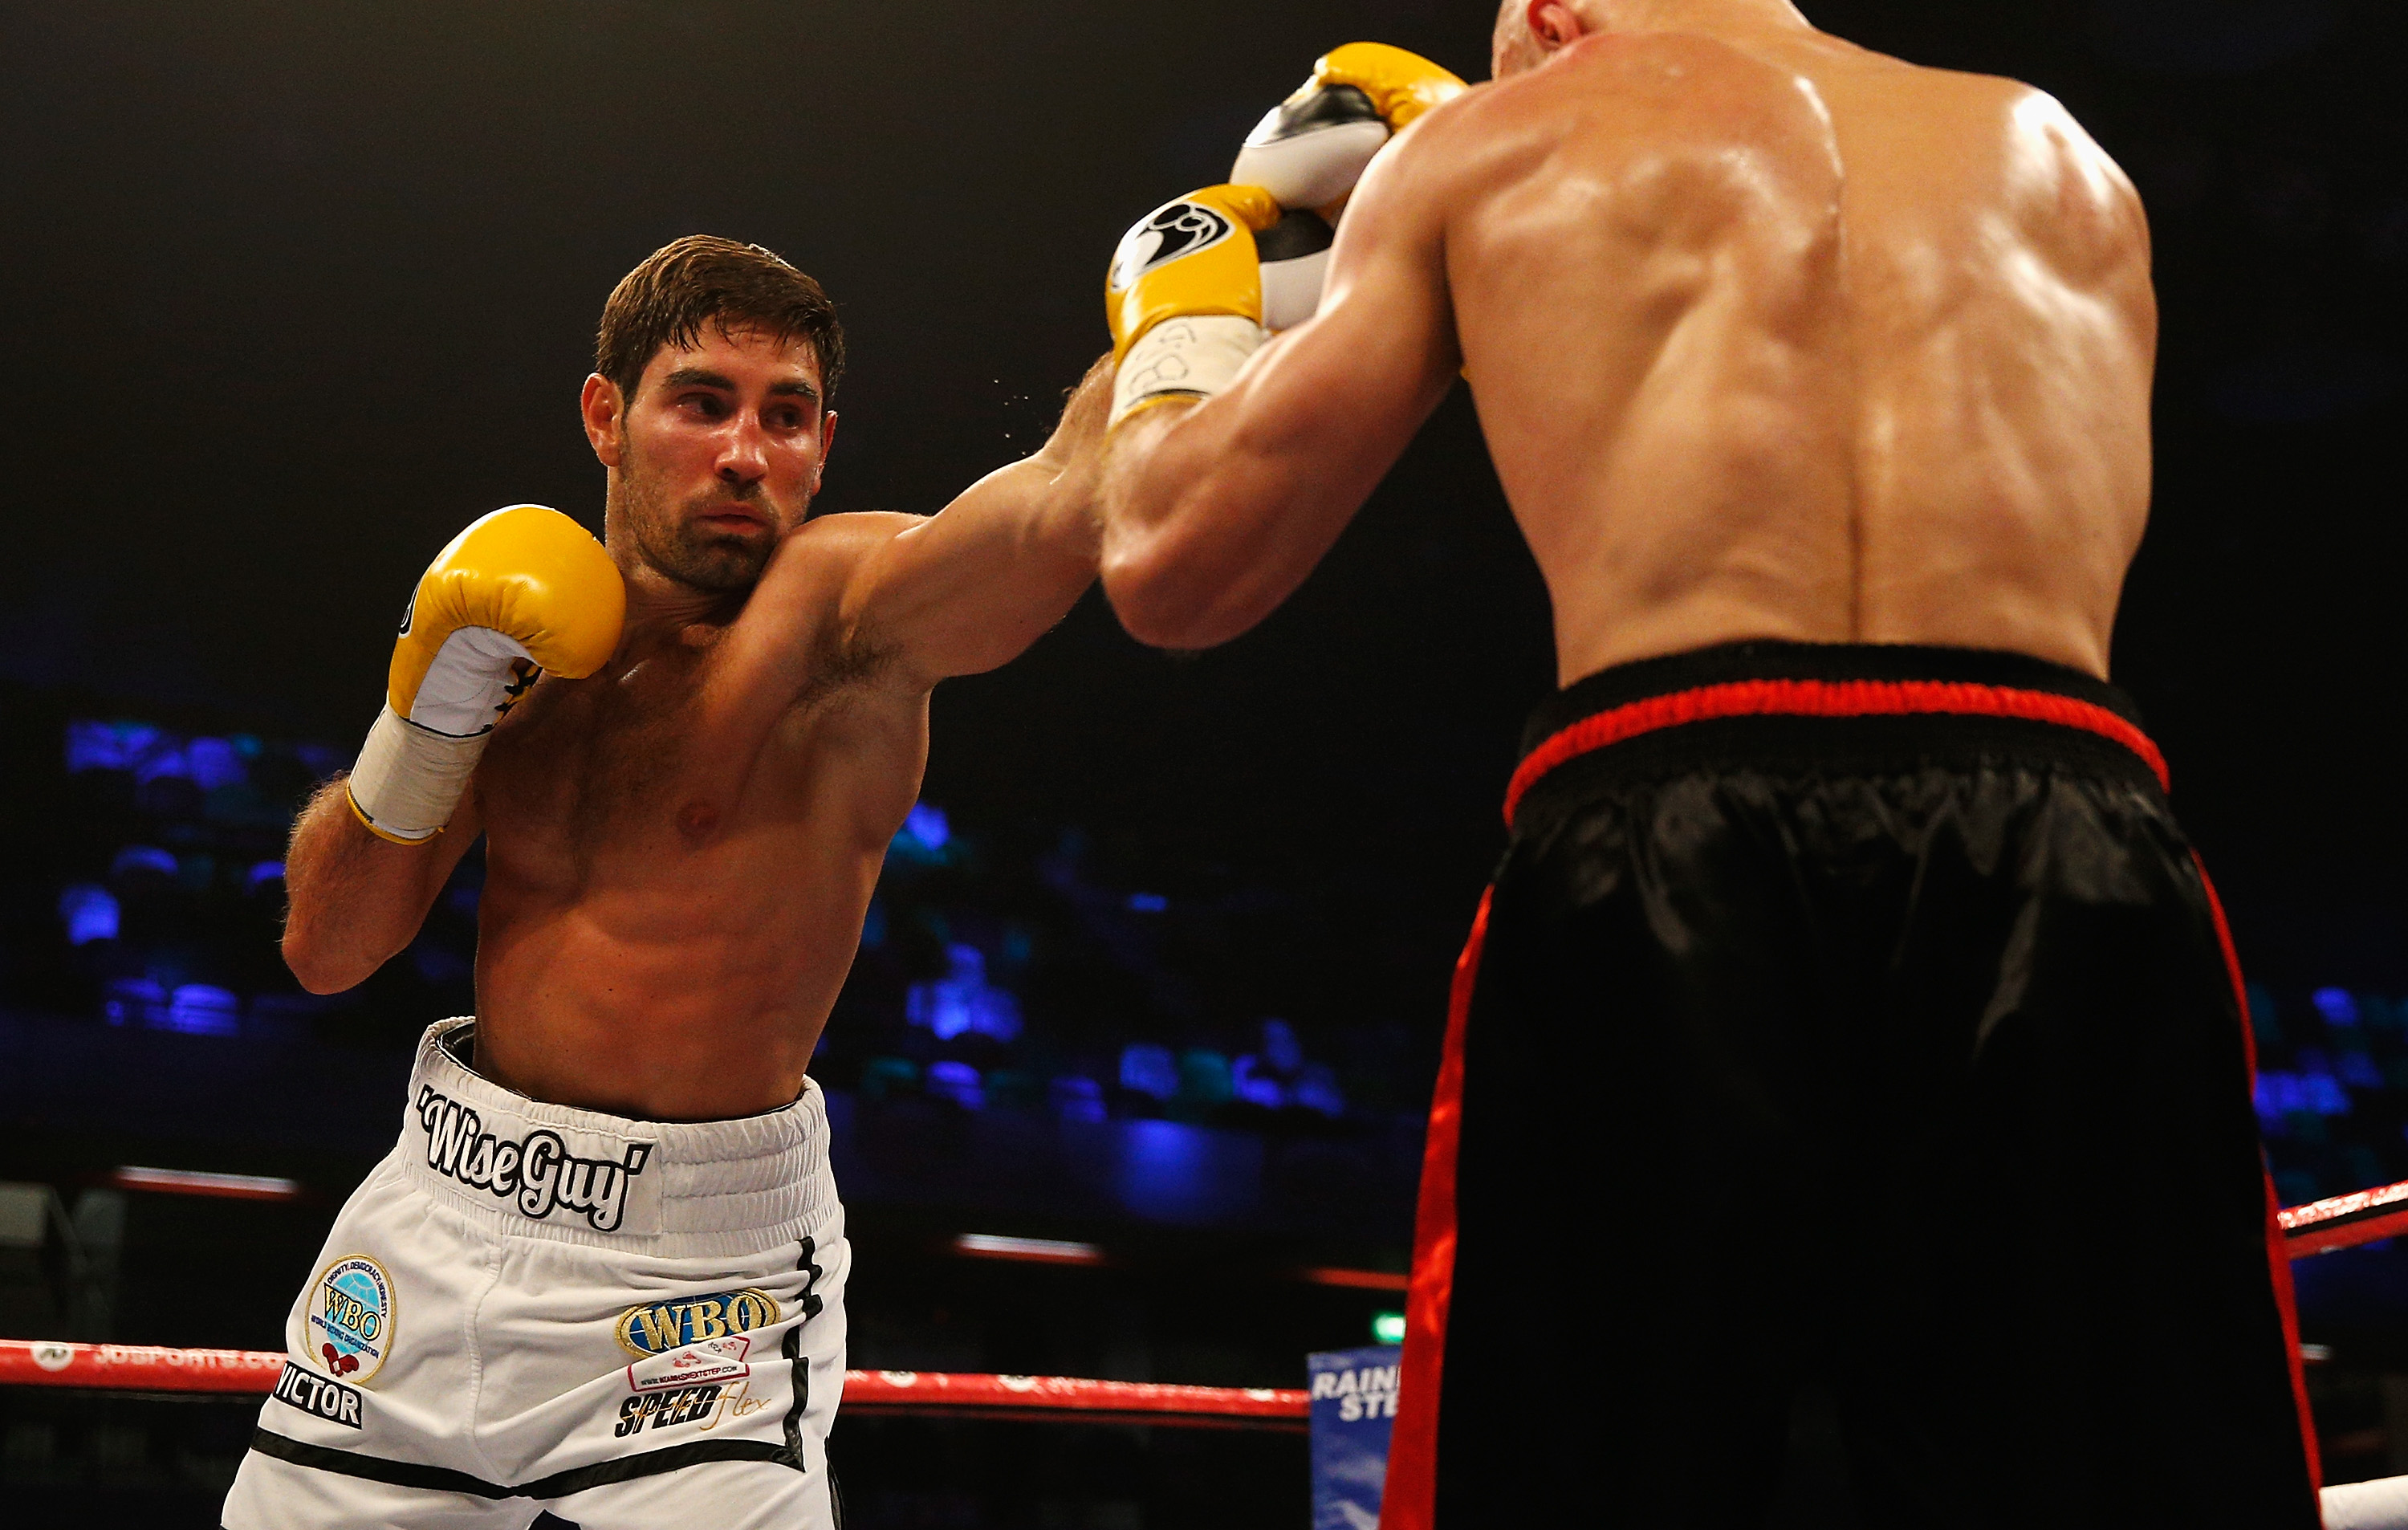 Frank Buglioni (L) and Sergey Khomitsky in action during their WBO European Super-Middleweight Championship bout at The Copper Box on April 12, 2014 in London, England. (Getty)